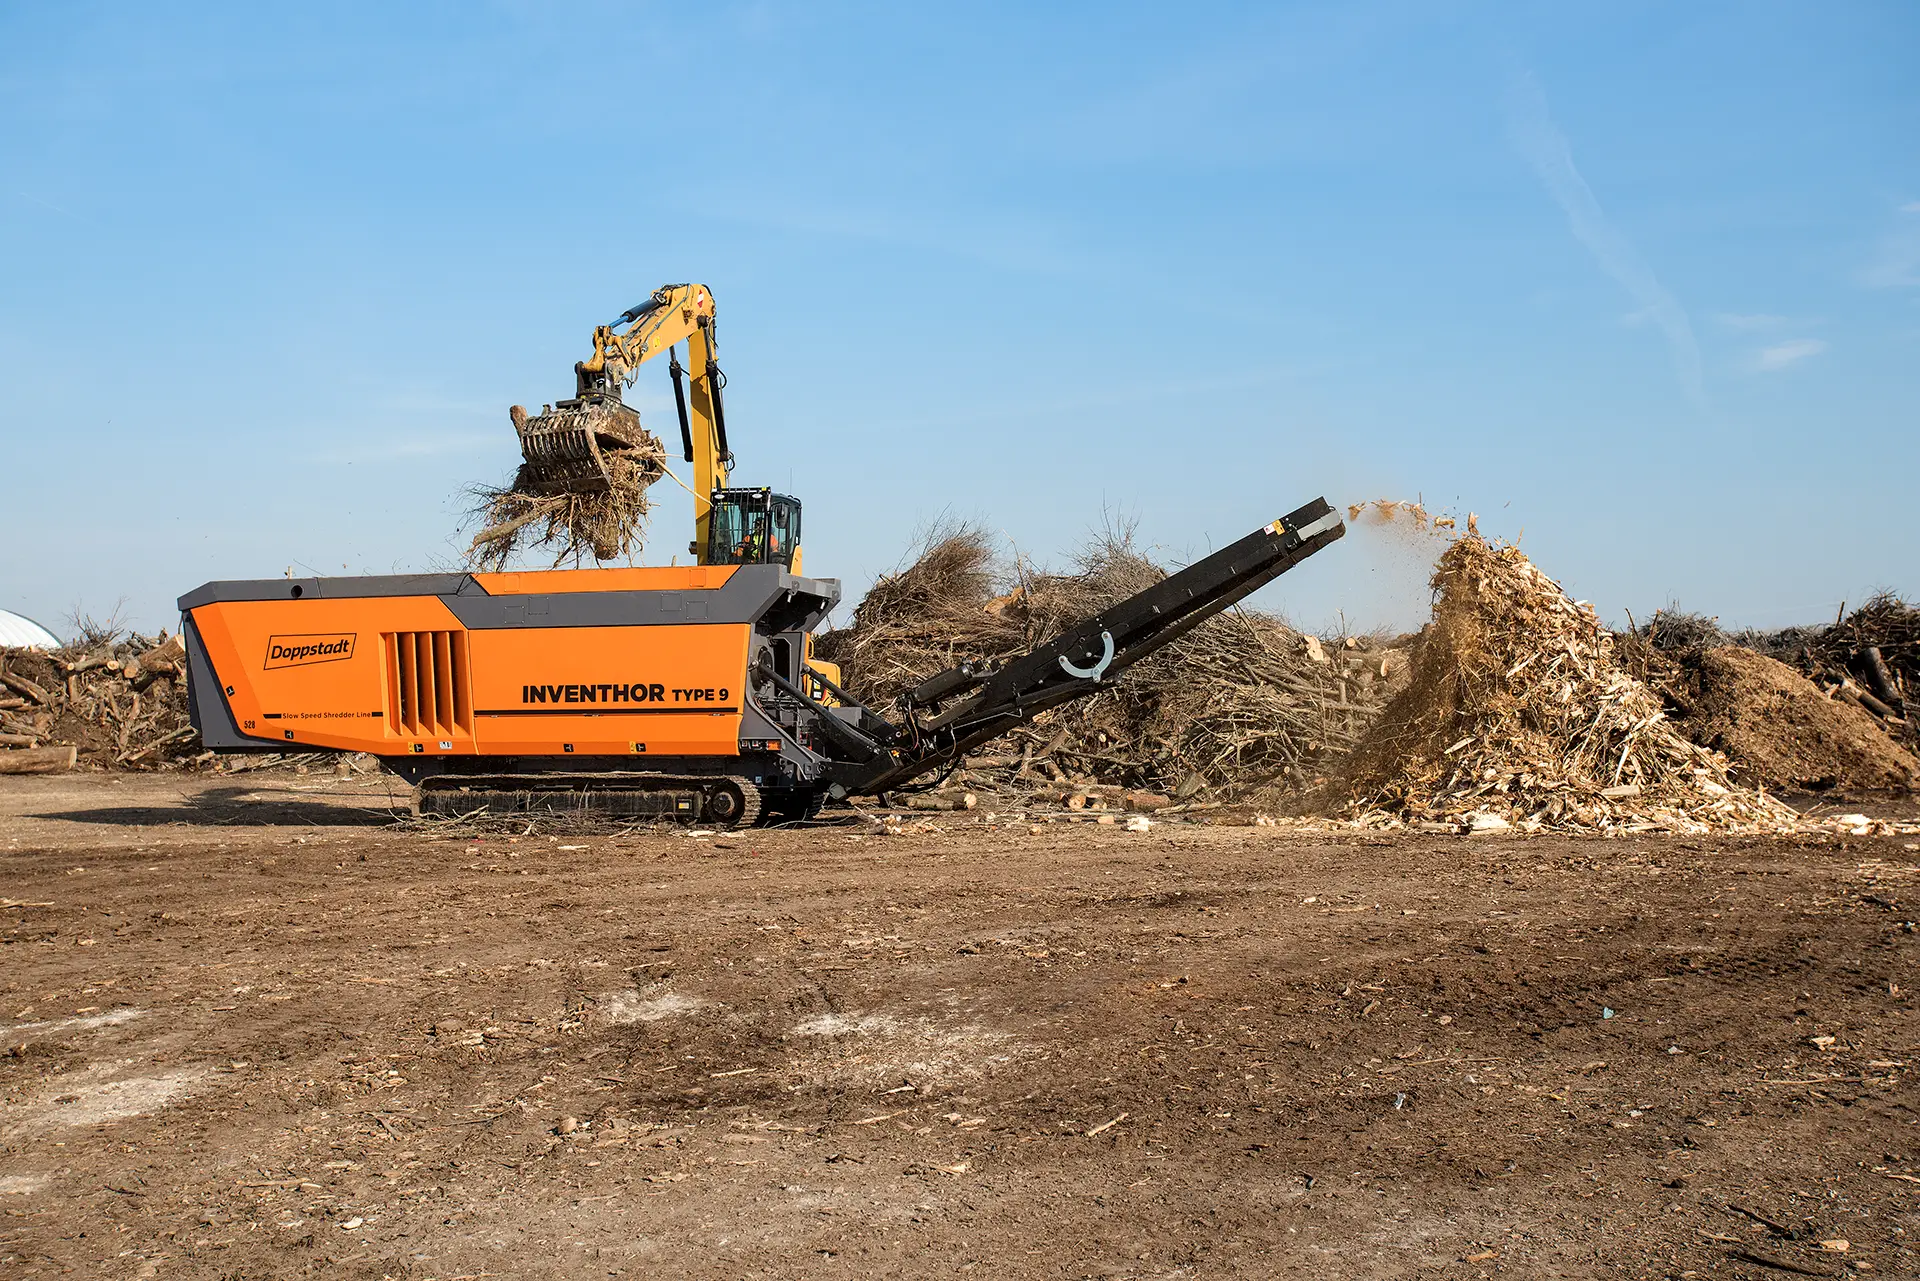 A Doppstadt high-torque shredder reduces green waste into small pieces to make mulch or compost.